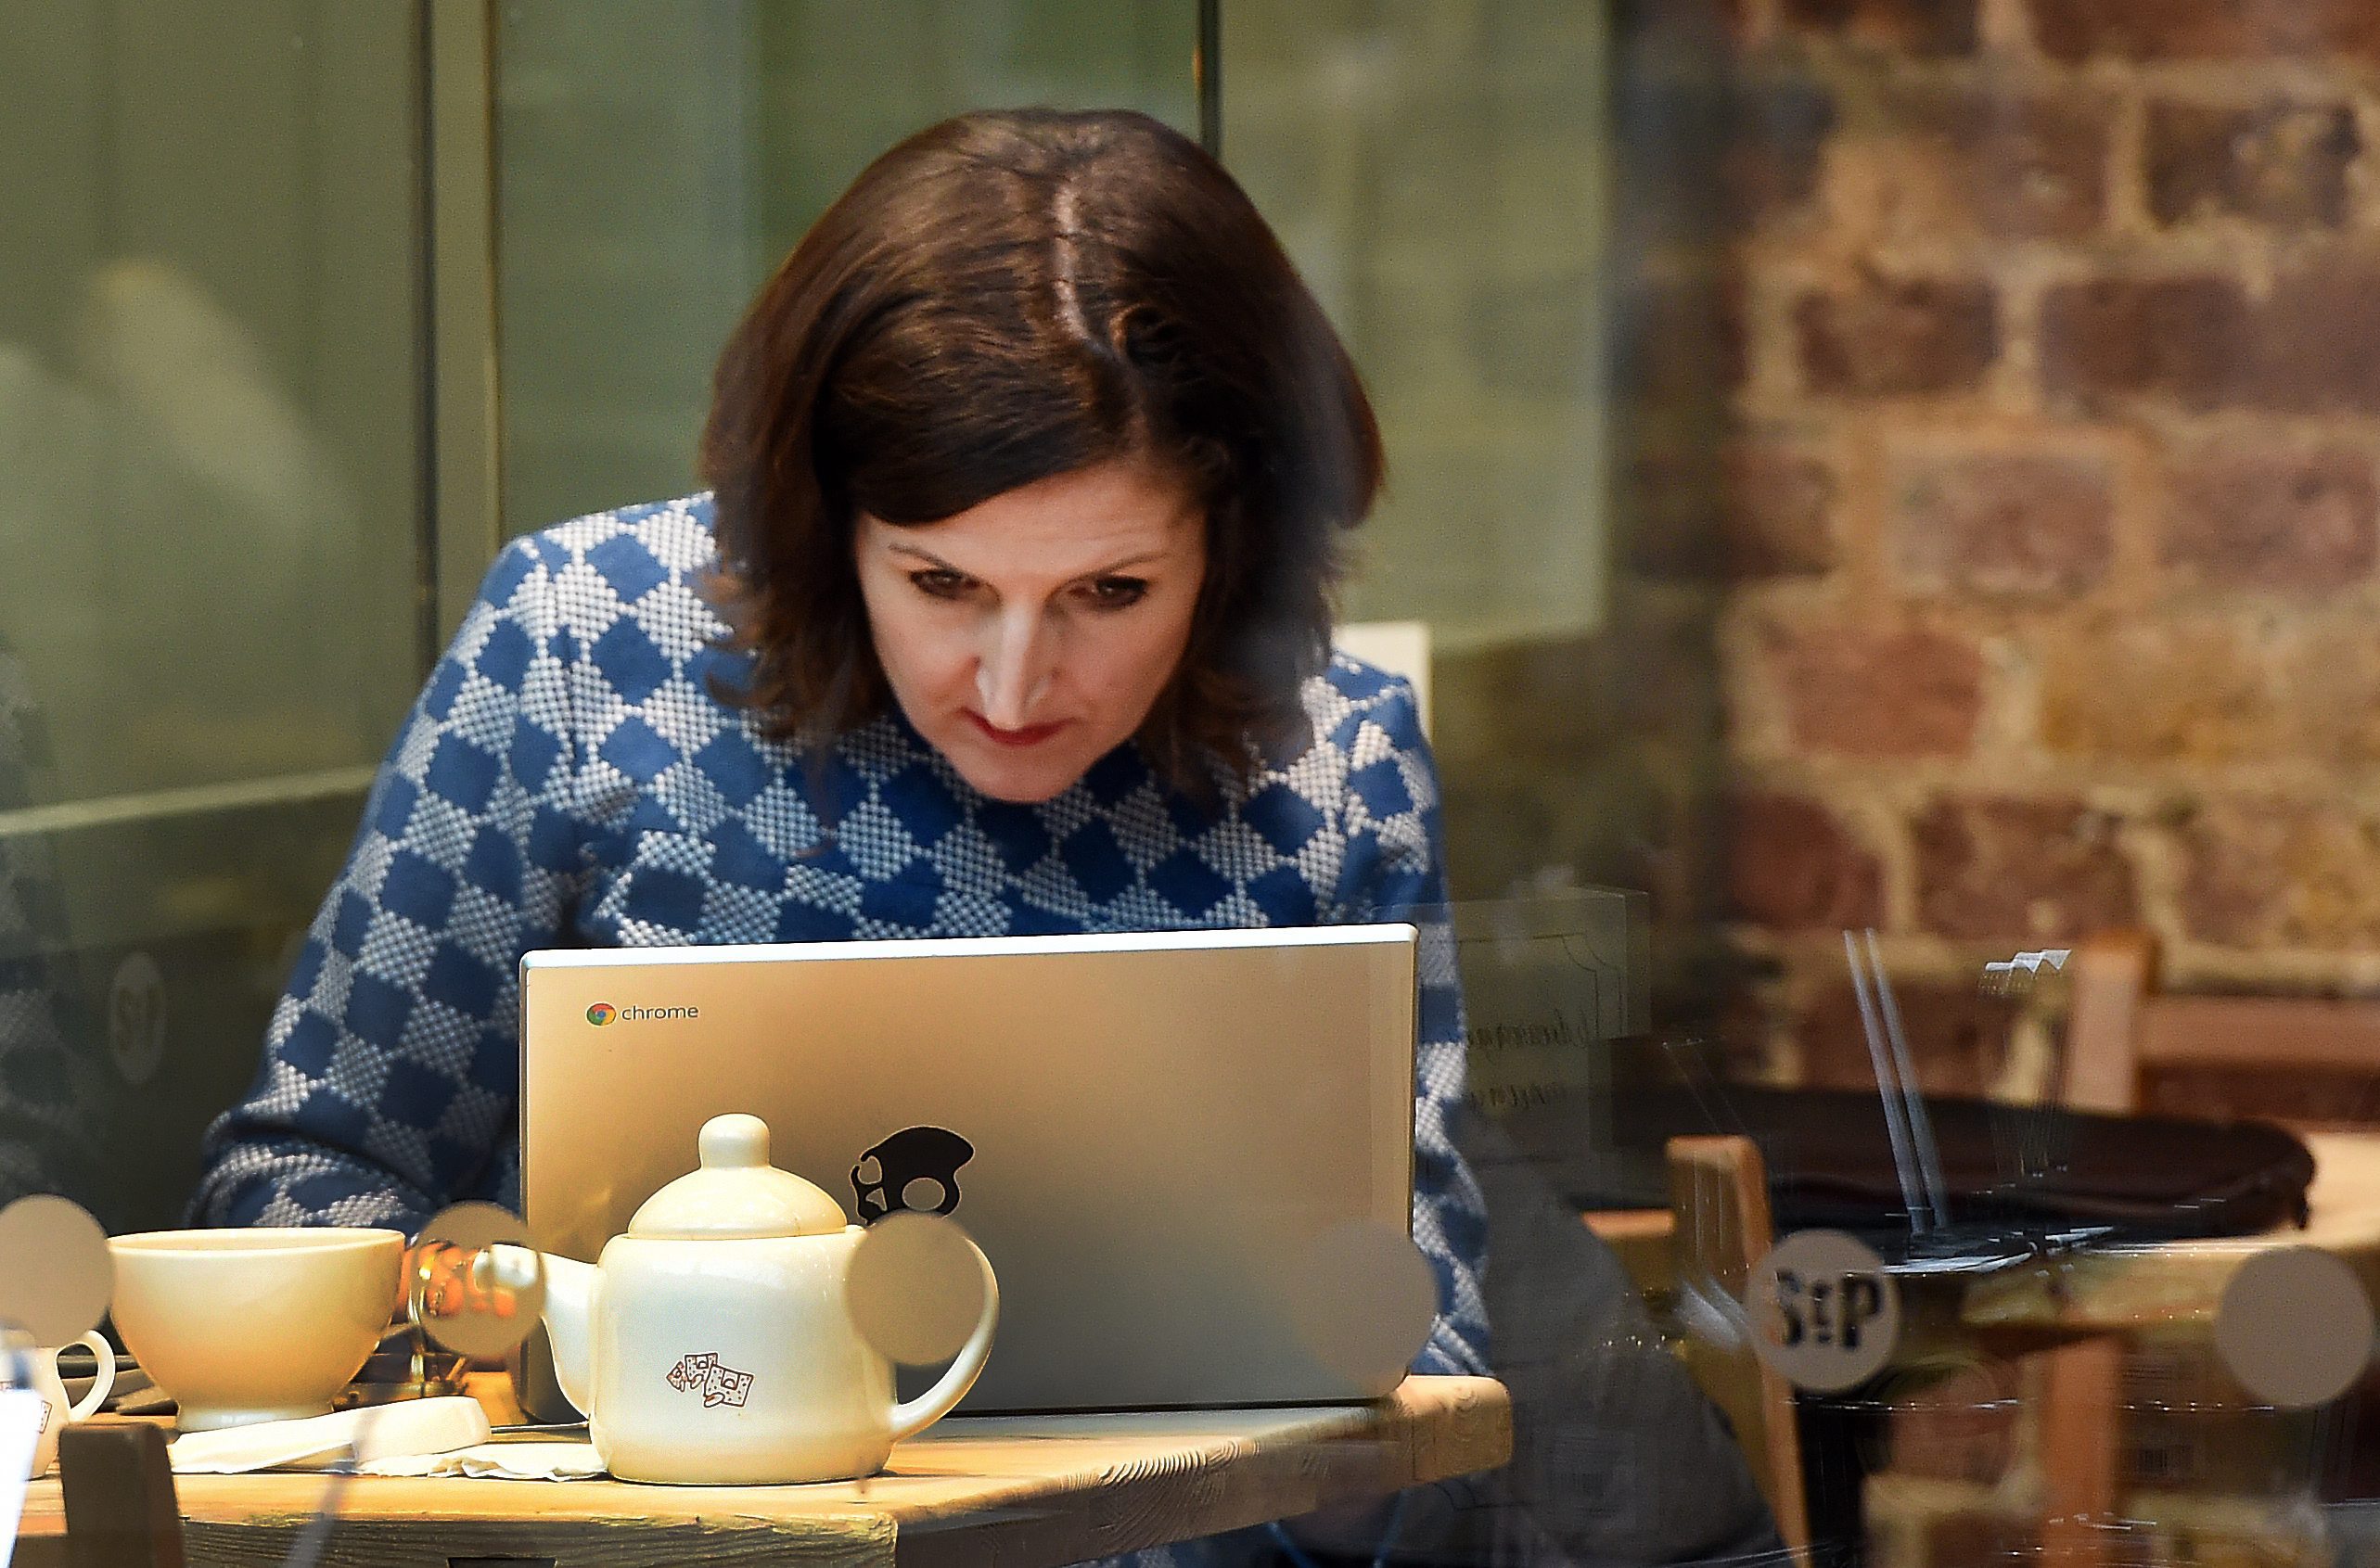 2016-01-14 13:16:45 epa05101506 A customer uses the internet at a coffee shop in London, Britain, 14 January 2016. Coffee shops with public wifi networks may be obliged to store internet data for up to a year under new snoopers charter laws, the UK government has said. EPA/ANDY RAIN